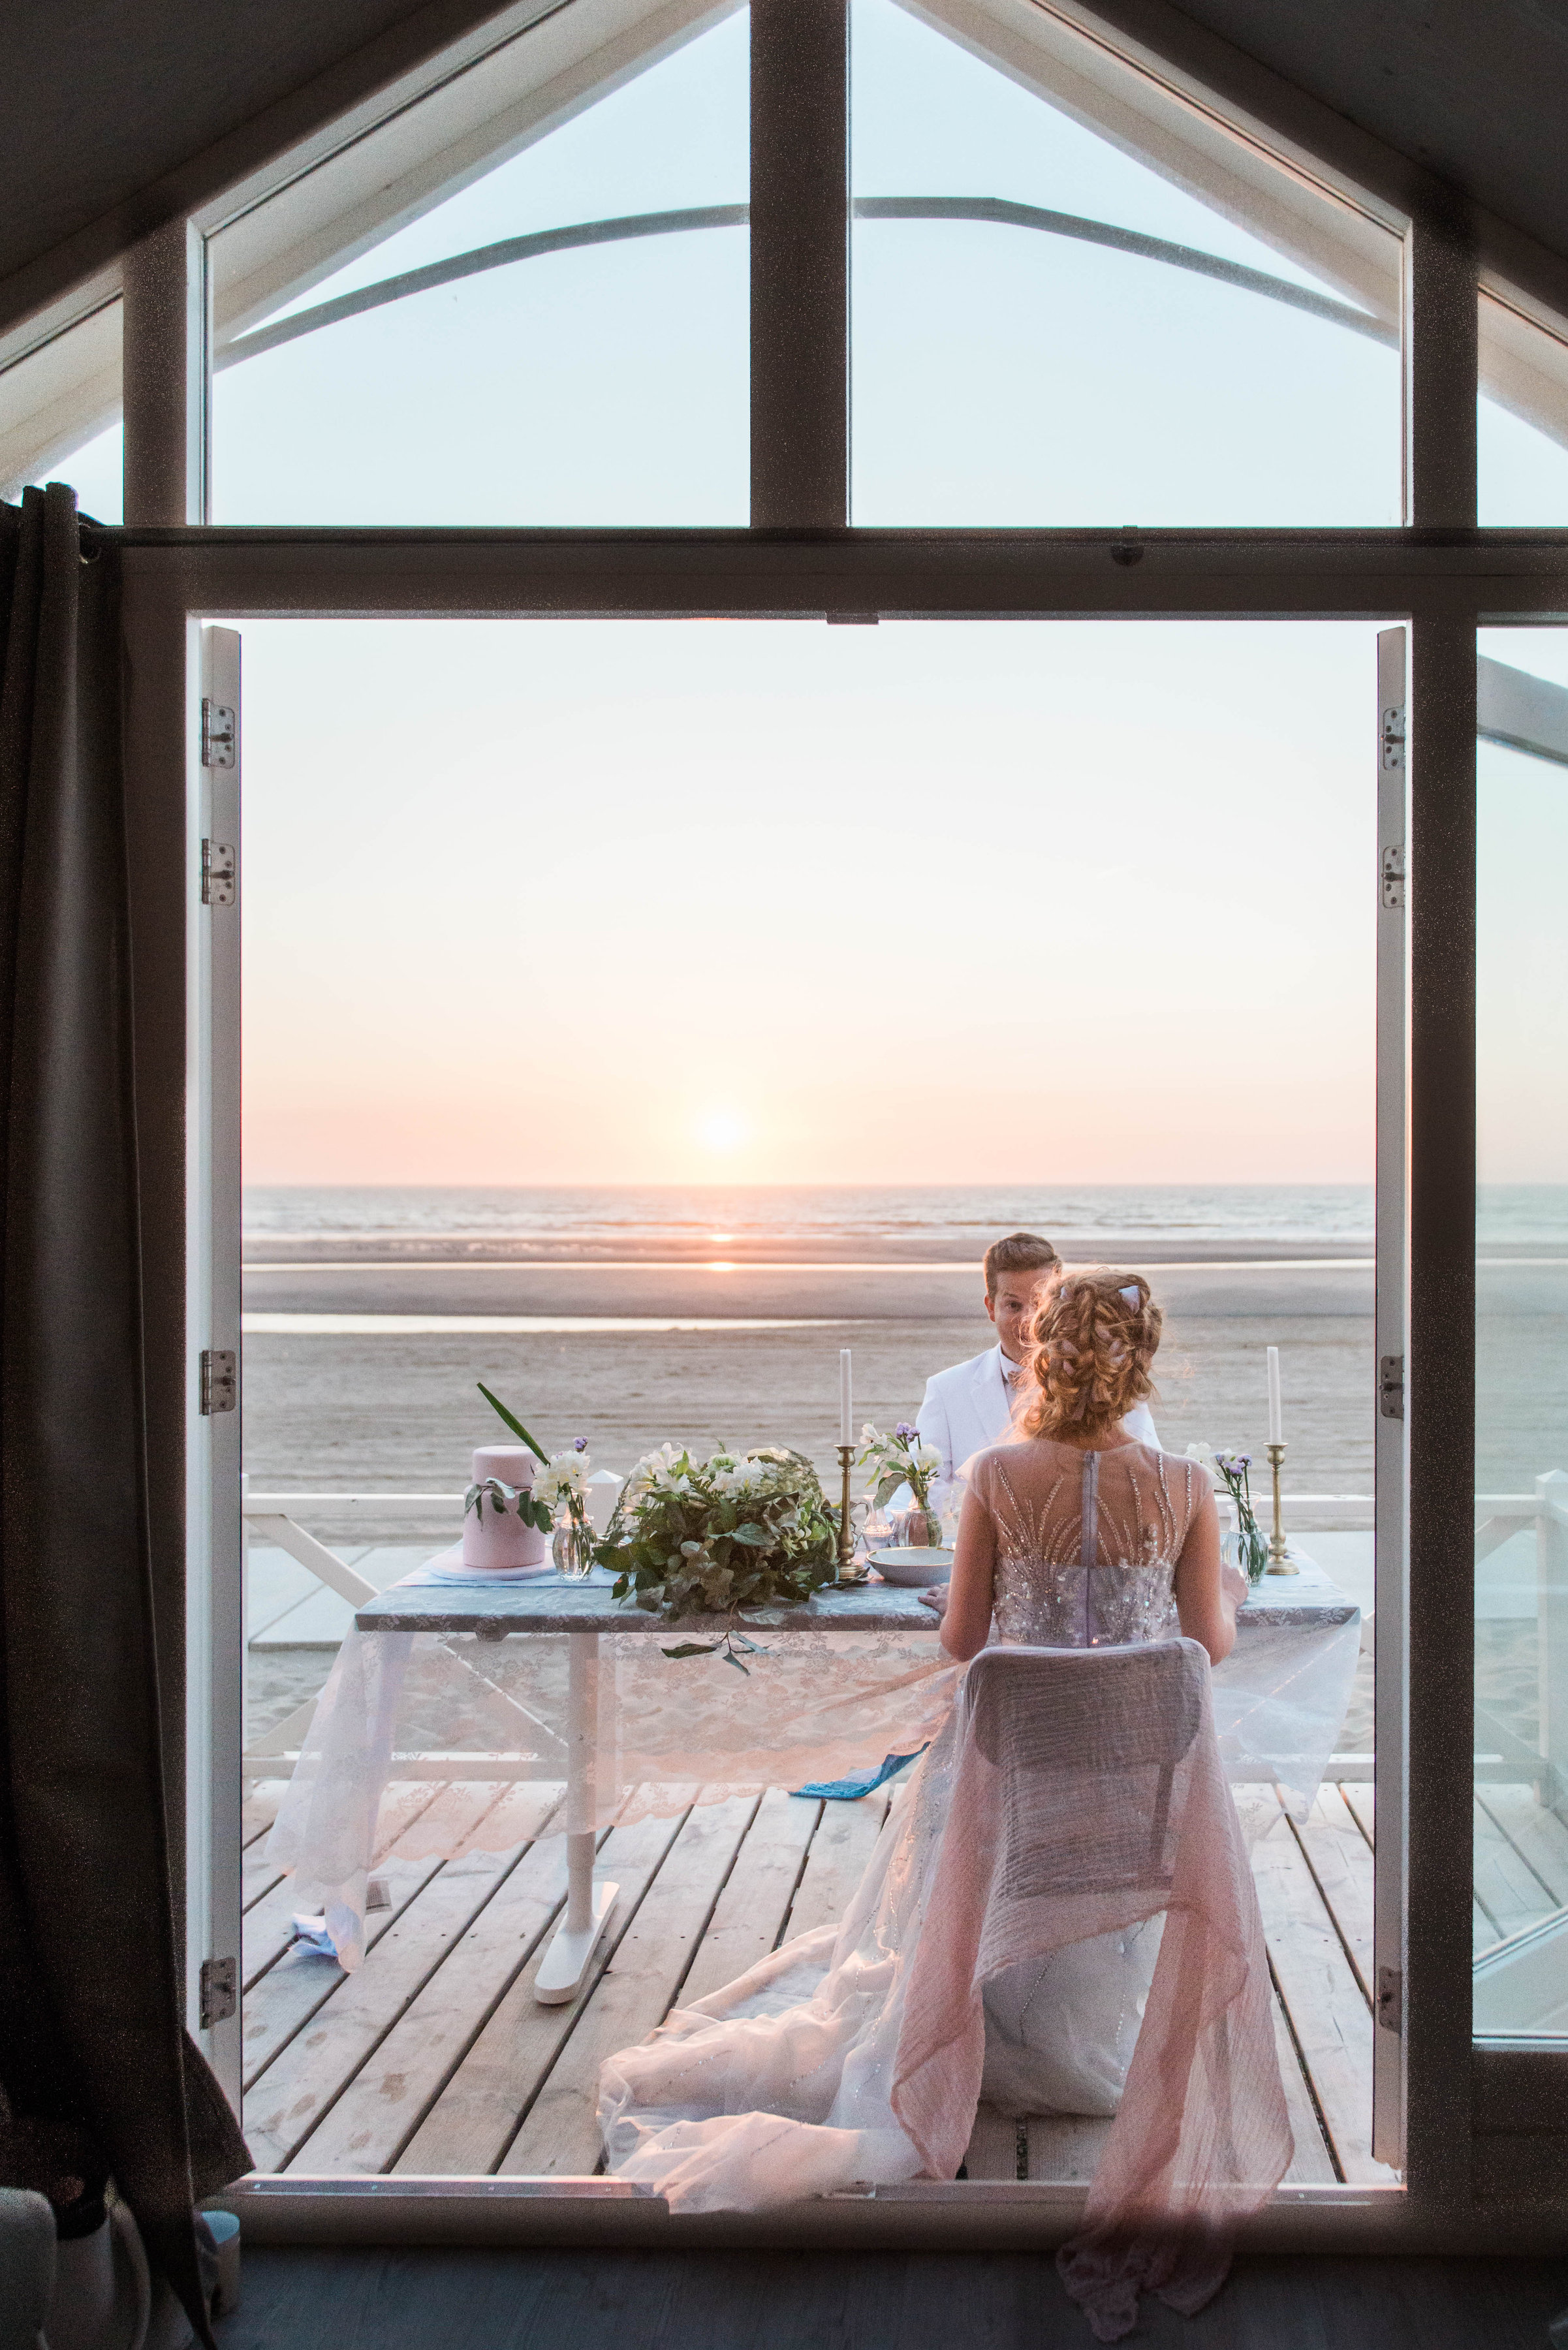 A beach elopement at sunset in The Netherlands